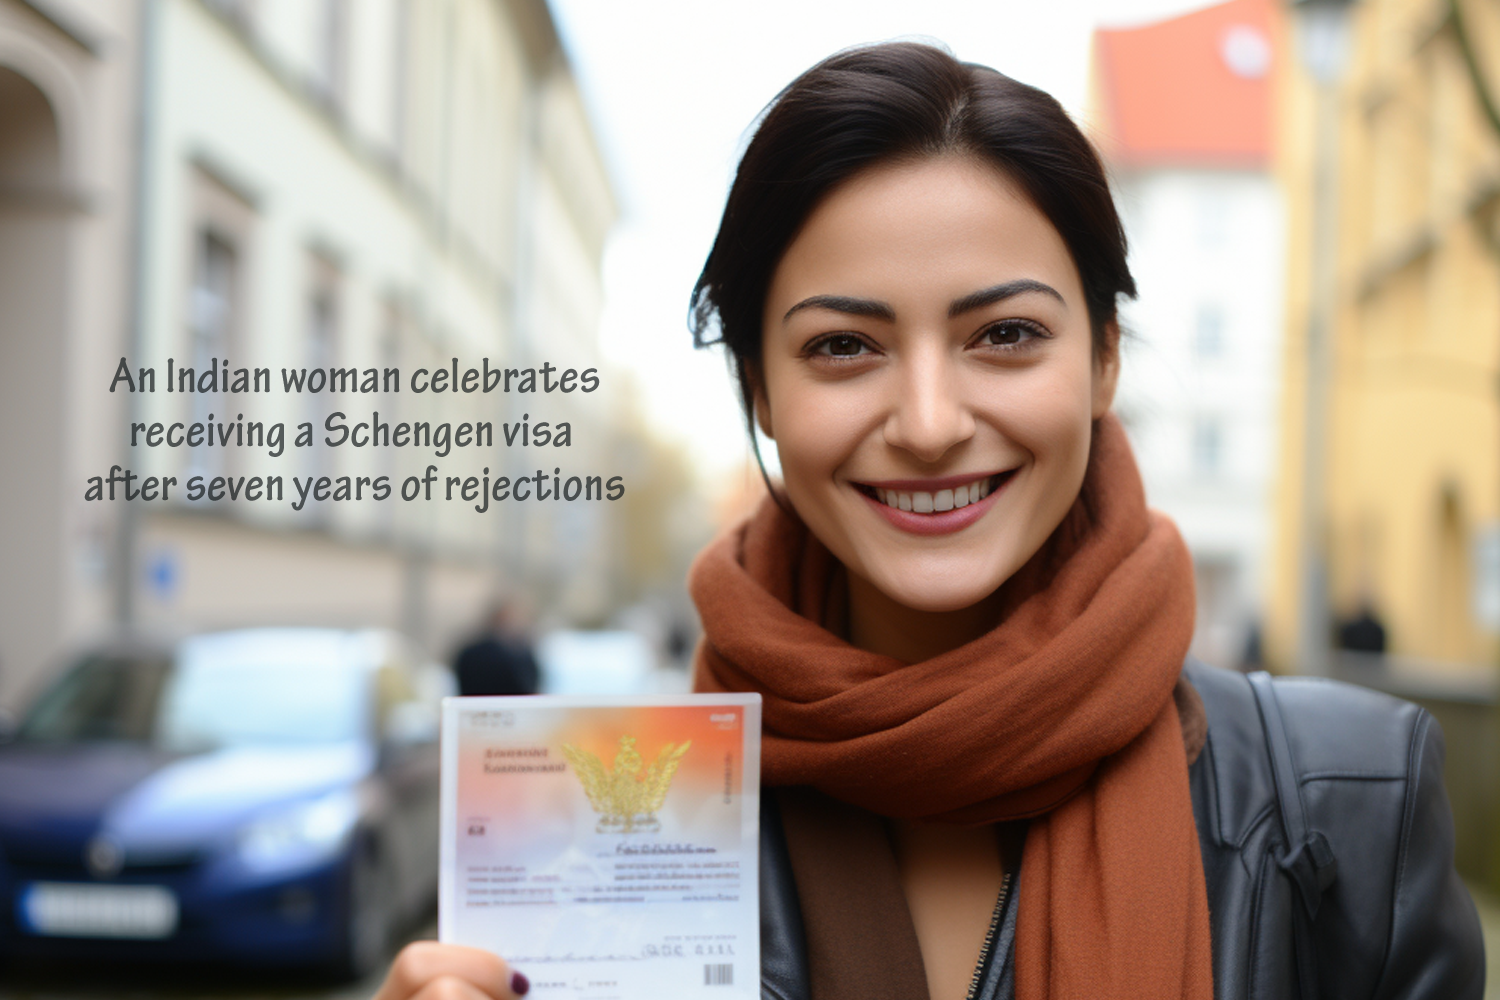 An Indian woman celebrates receiving a Schengen visa after seven years of rejections.